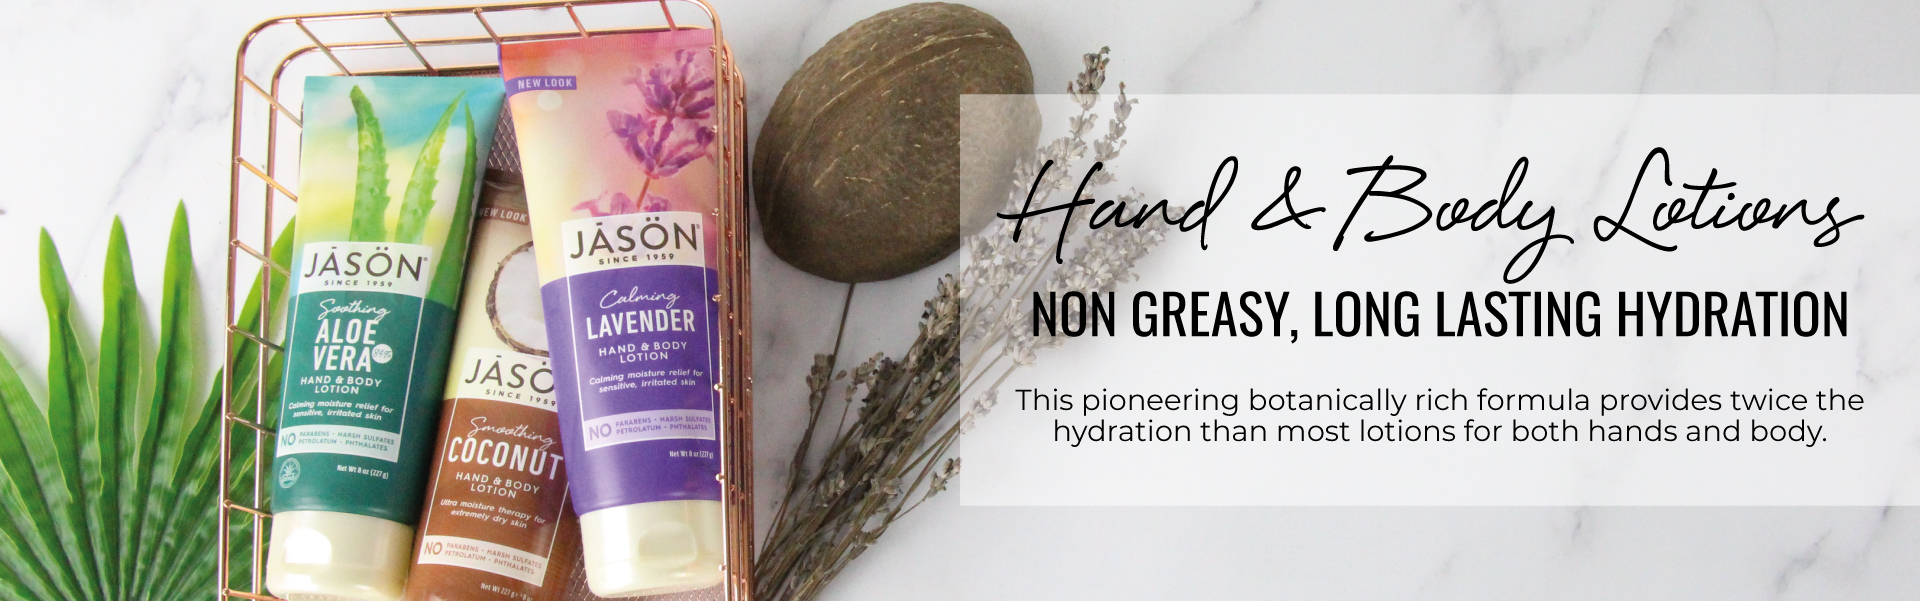 Hand & Body Lotions